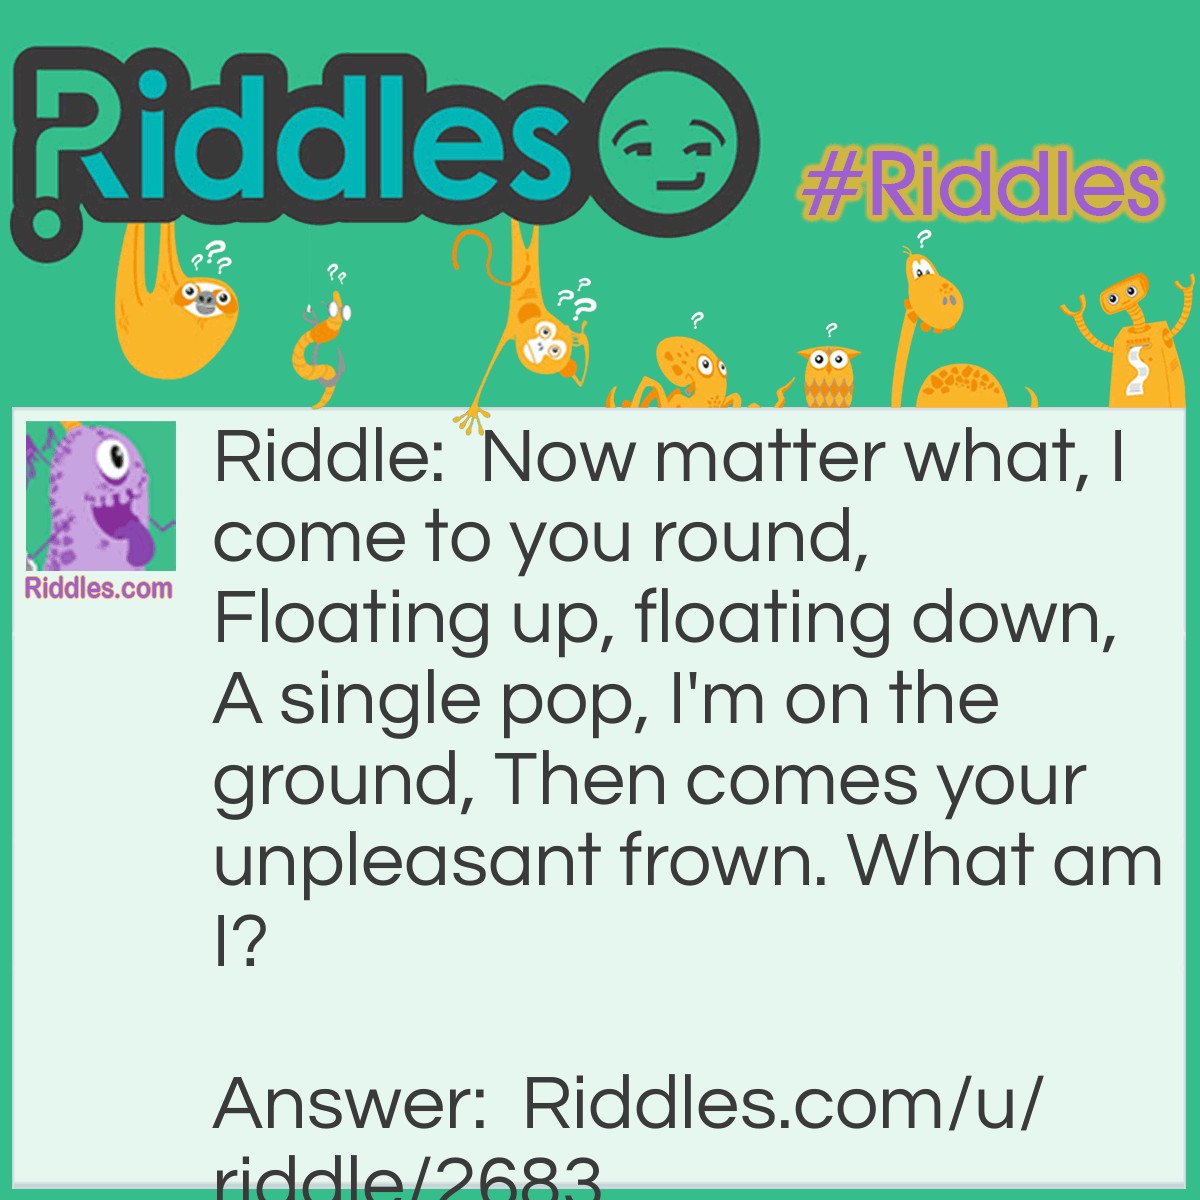 Riddle: Now matter what, I come to you round, Floating up, floating down, A single pop, I'm on the ground, Then comes your unpleasant frown. What am I? Answer: I am a bubble. Bubbles always come out round no matter how you blow it. Bubbles also pop when they touch the ground. Usually bubbles go up and then down. Most of the time you and I will frown when a bubble pops. Therefore, the answer is a bubble.